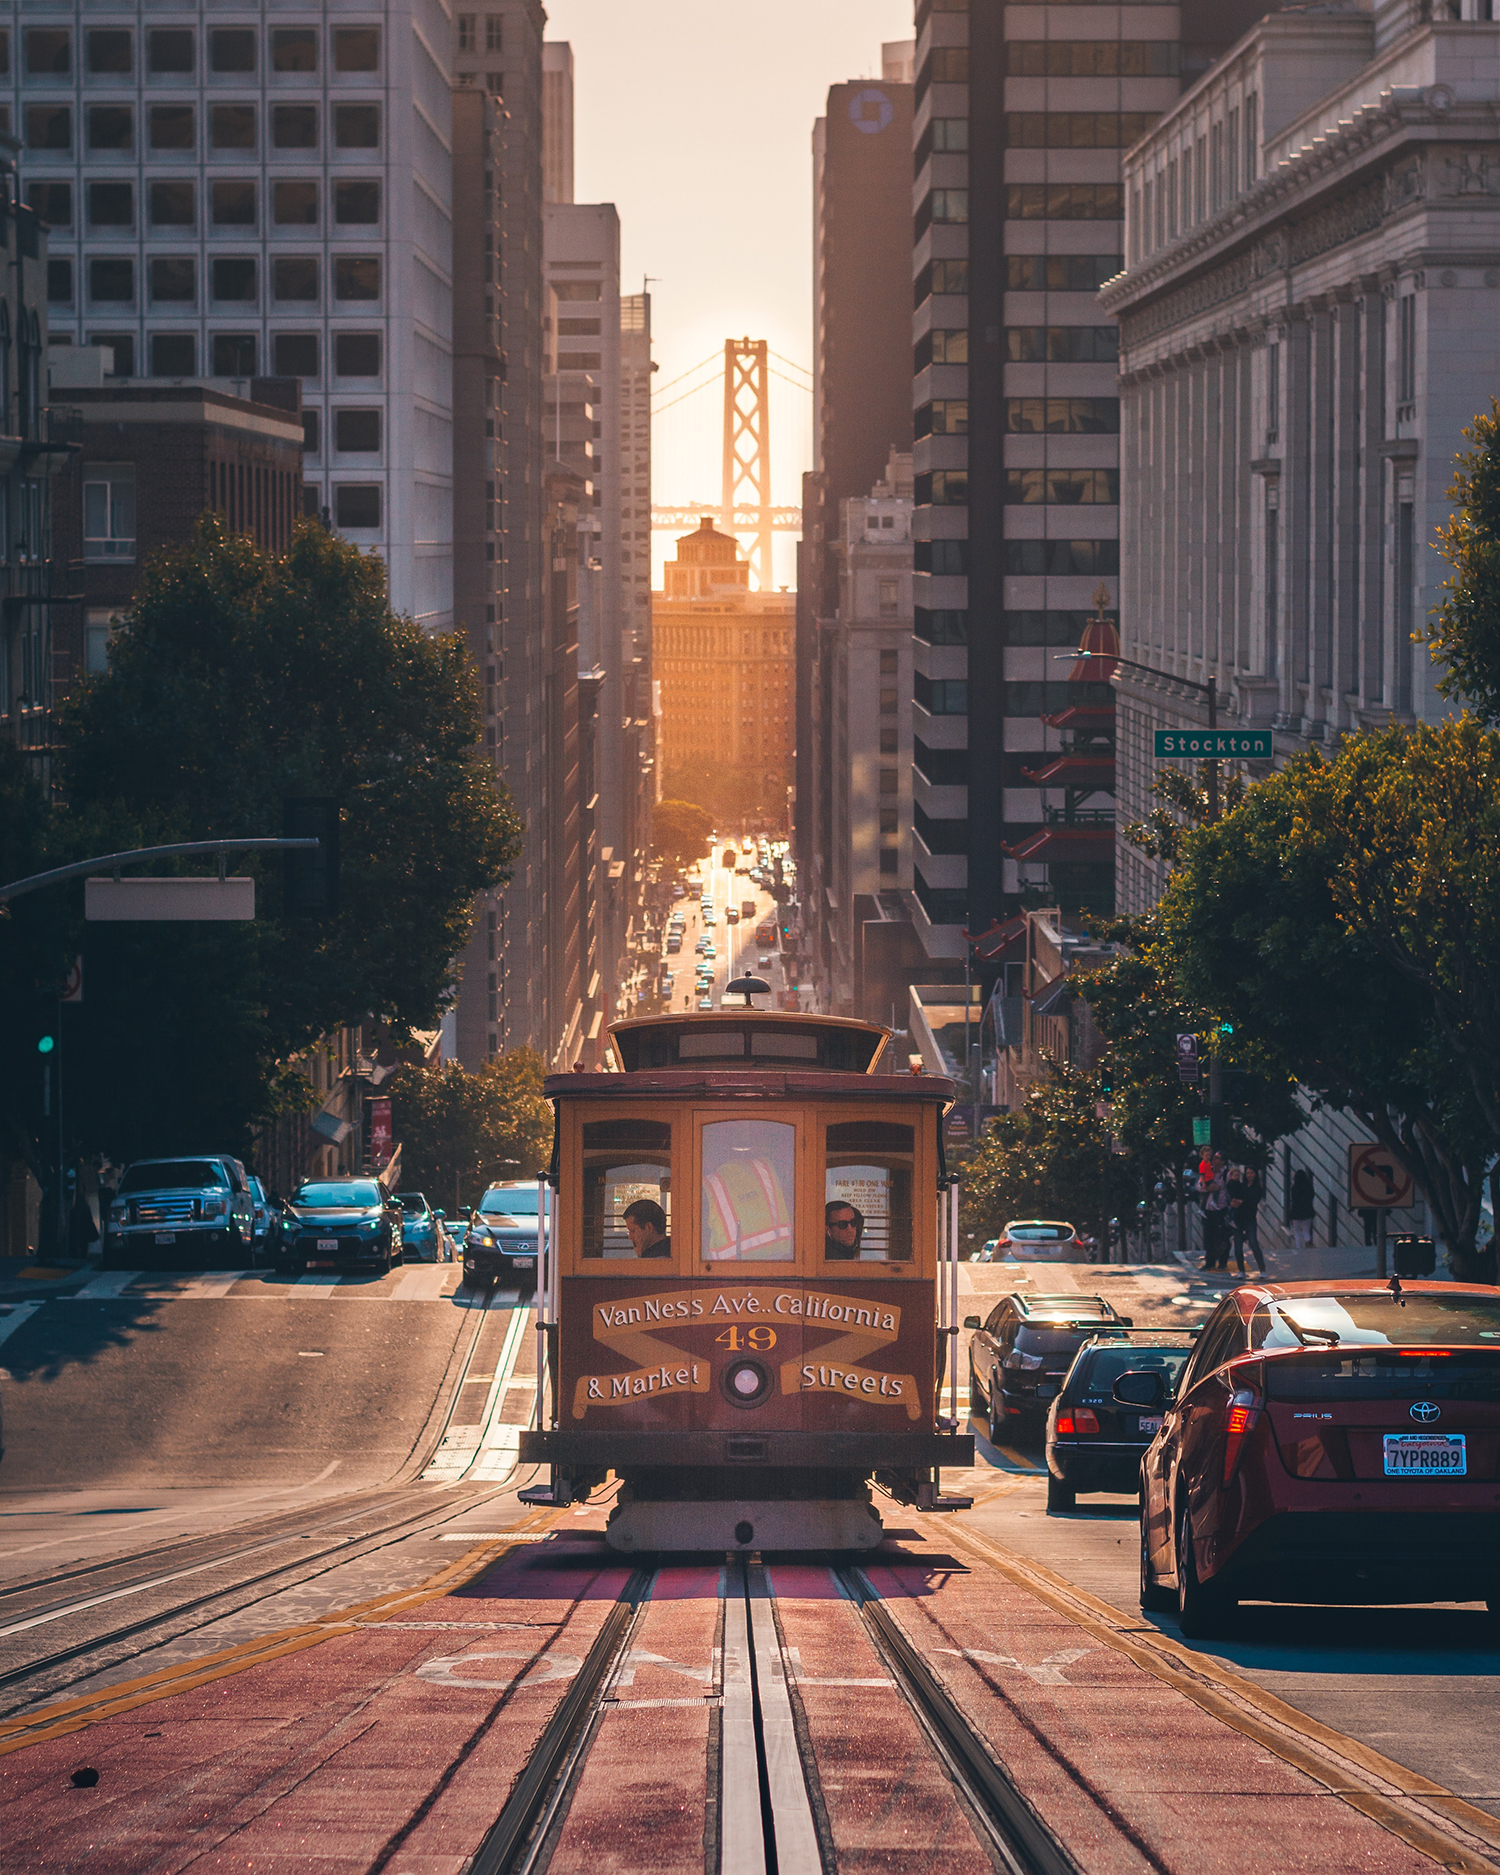 Top 7 places to visit in San Francisco